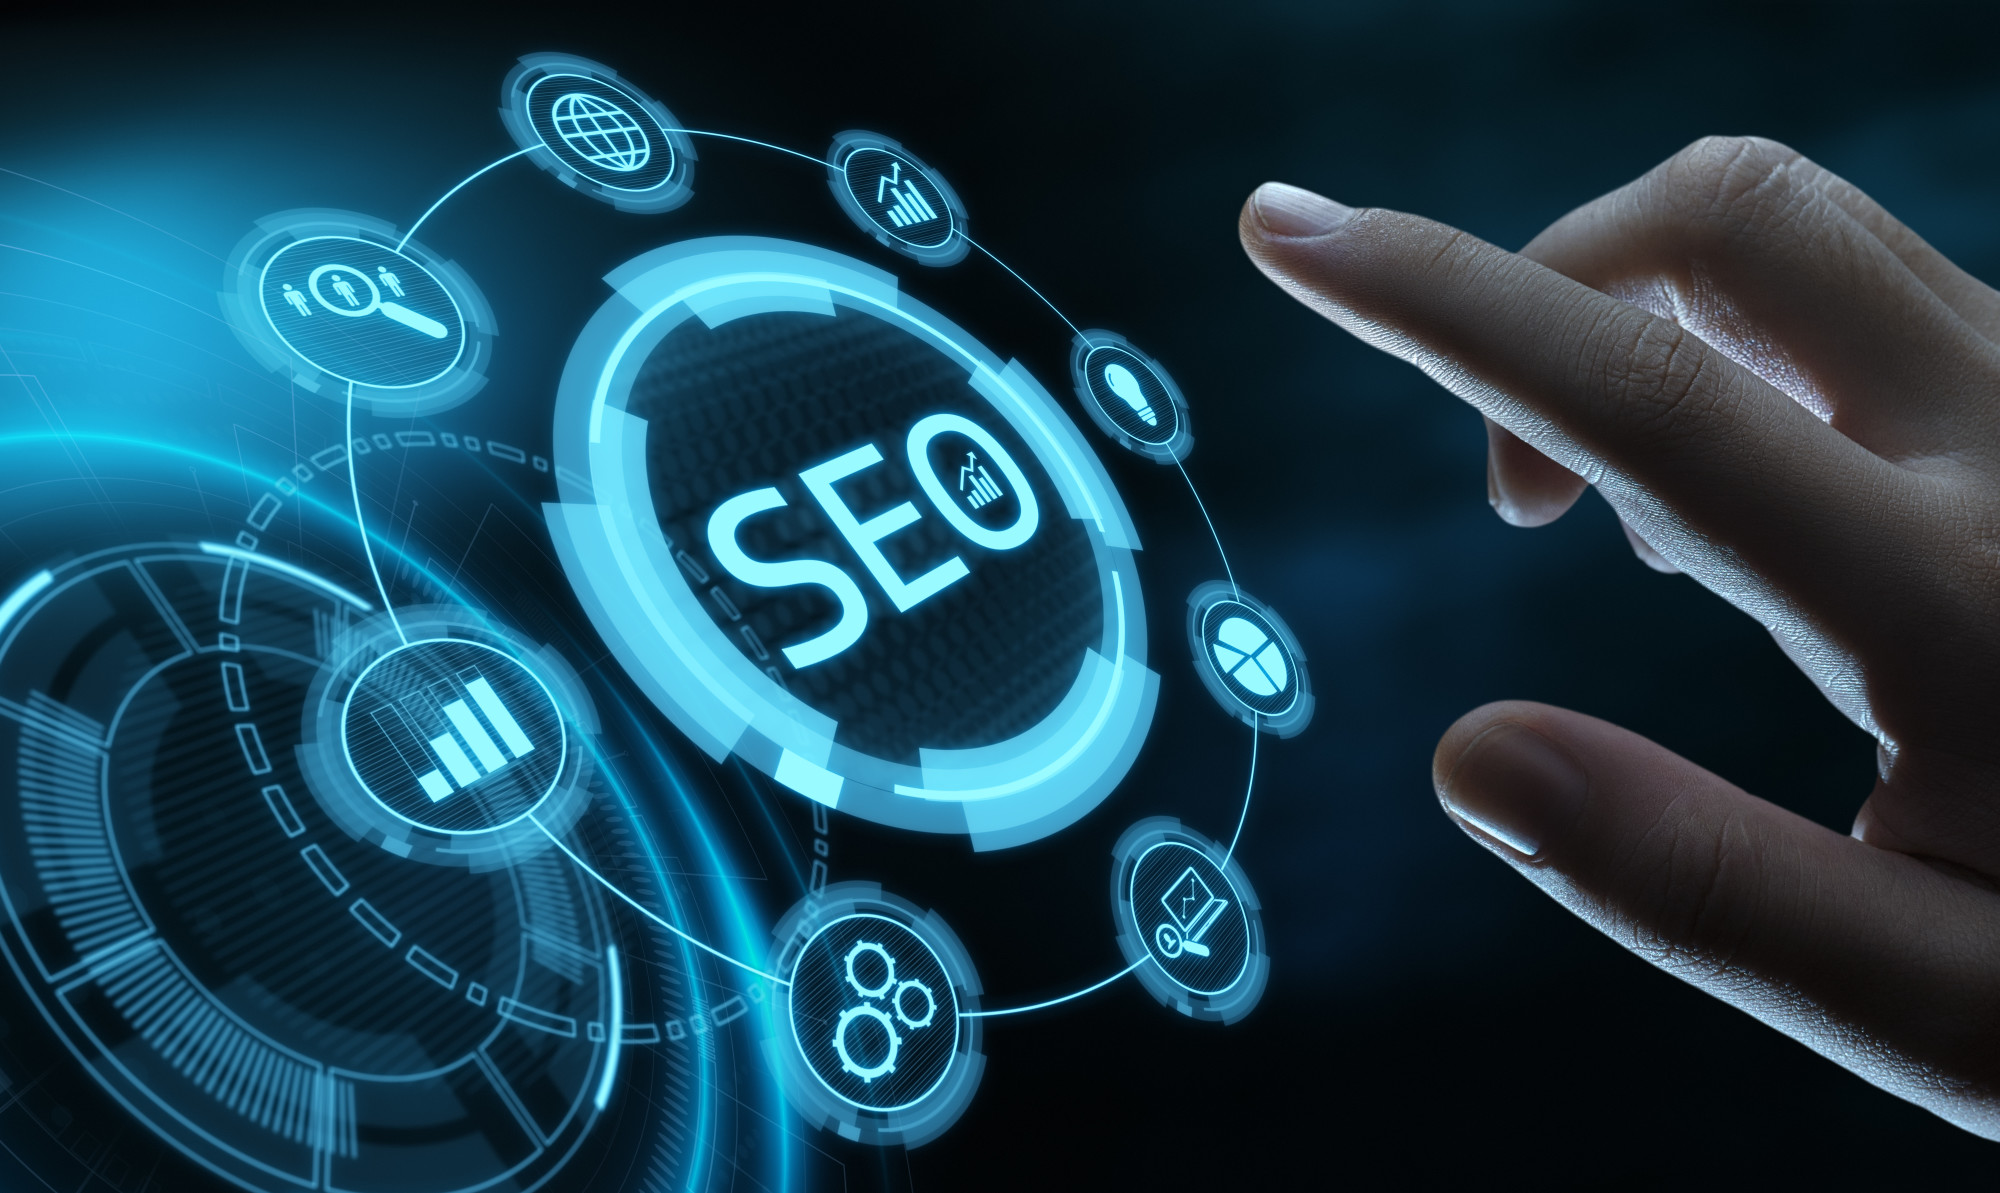 What Qualifications Should A SEO Expert Have?